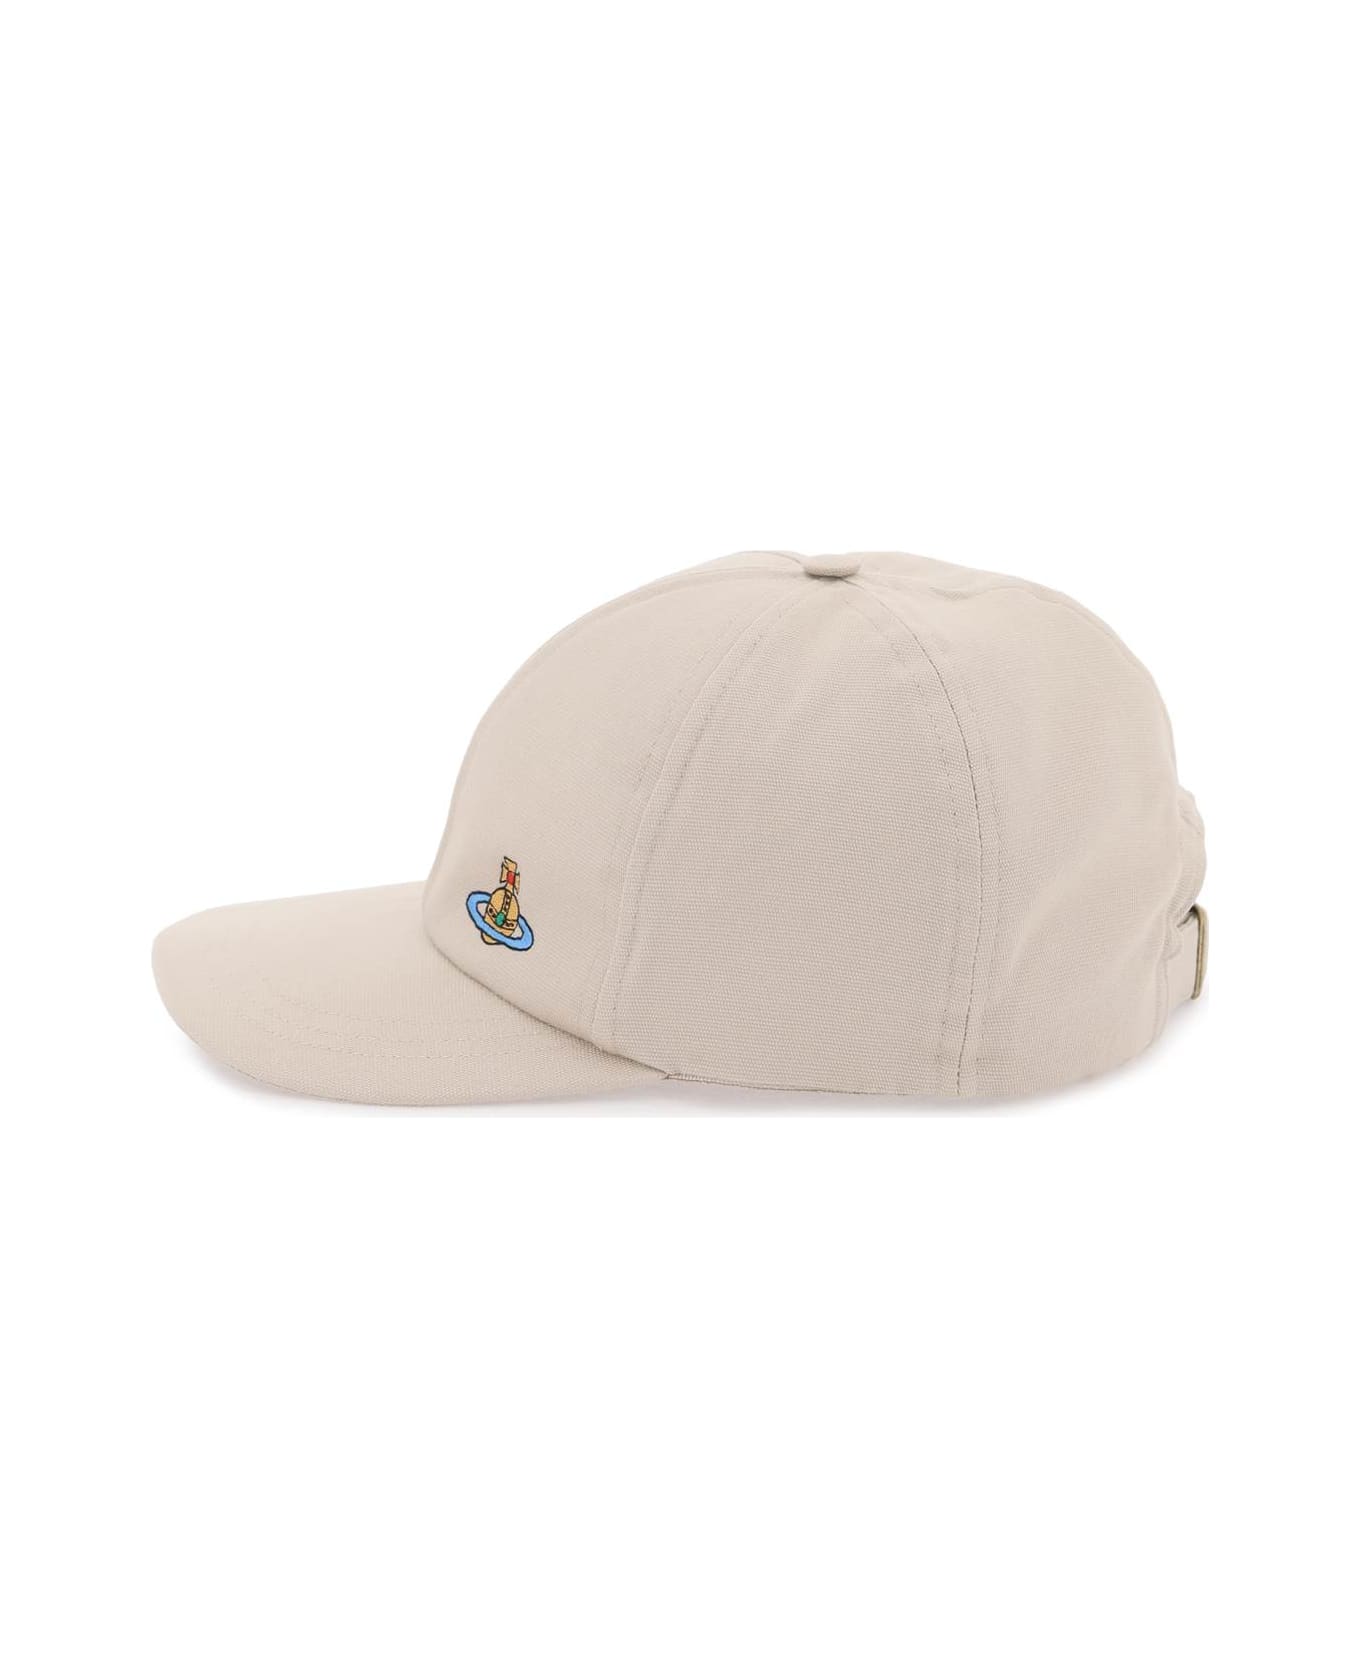 Vivienne Westwood Uni Colour Baseball Cap With Orb Embroidery - SAND (Beige) アクセサリー